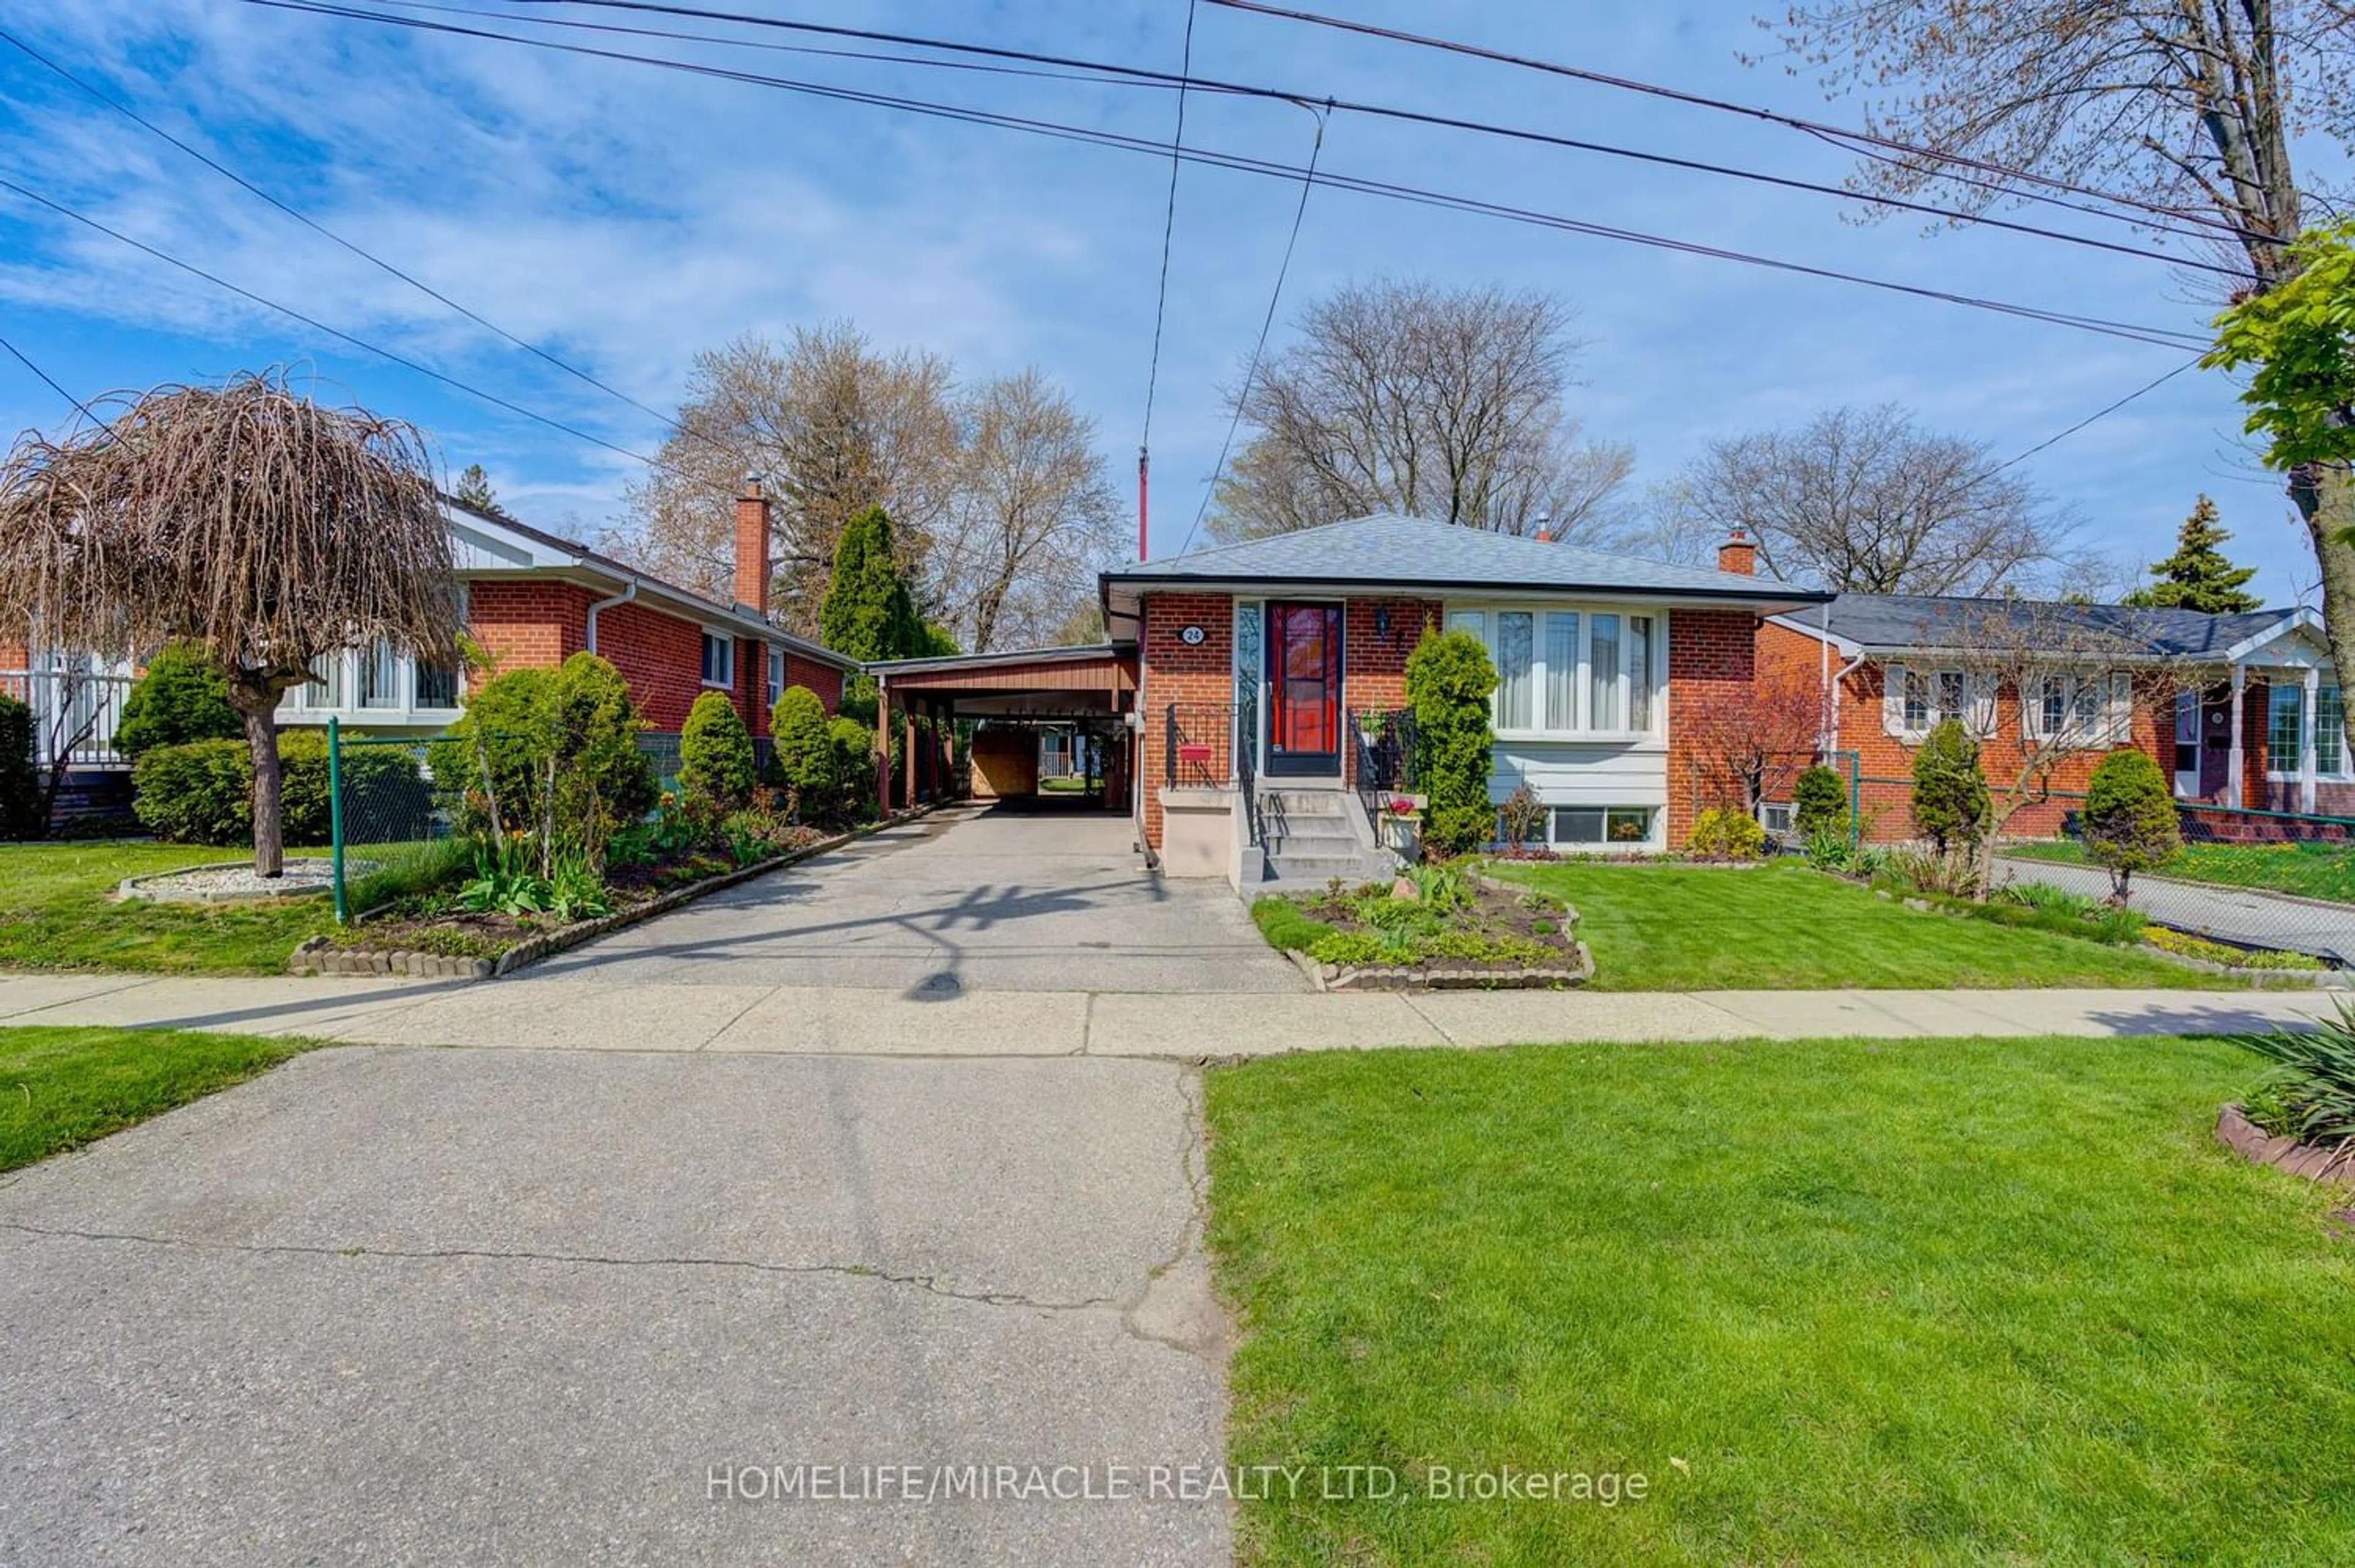 Frontside or backside of a home for 24 Ivanhoe Crt, Toronto Ontario M1R 3G9